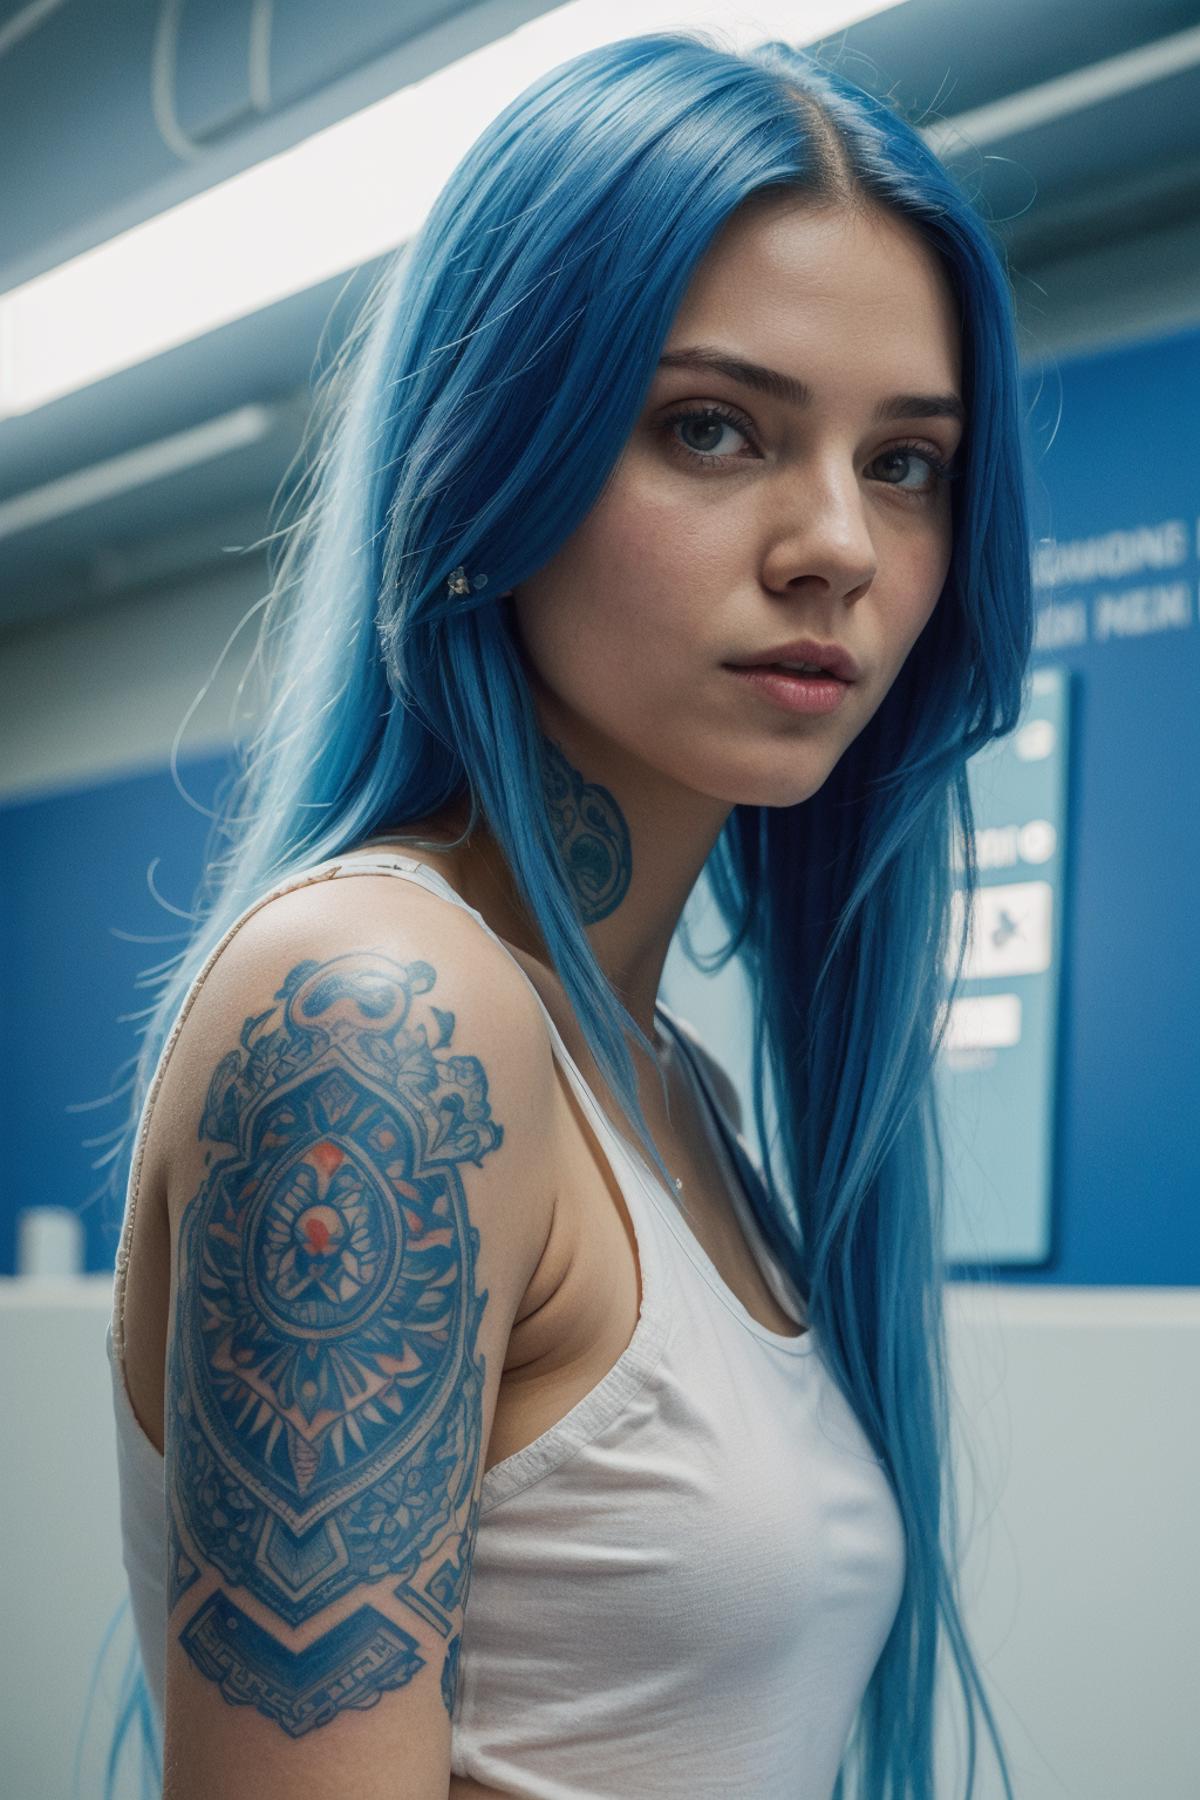 Blue-haired woman with tattoos and a white shirt.